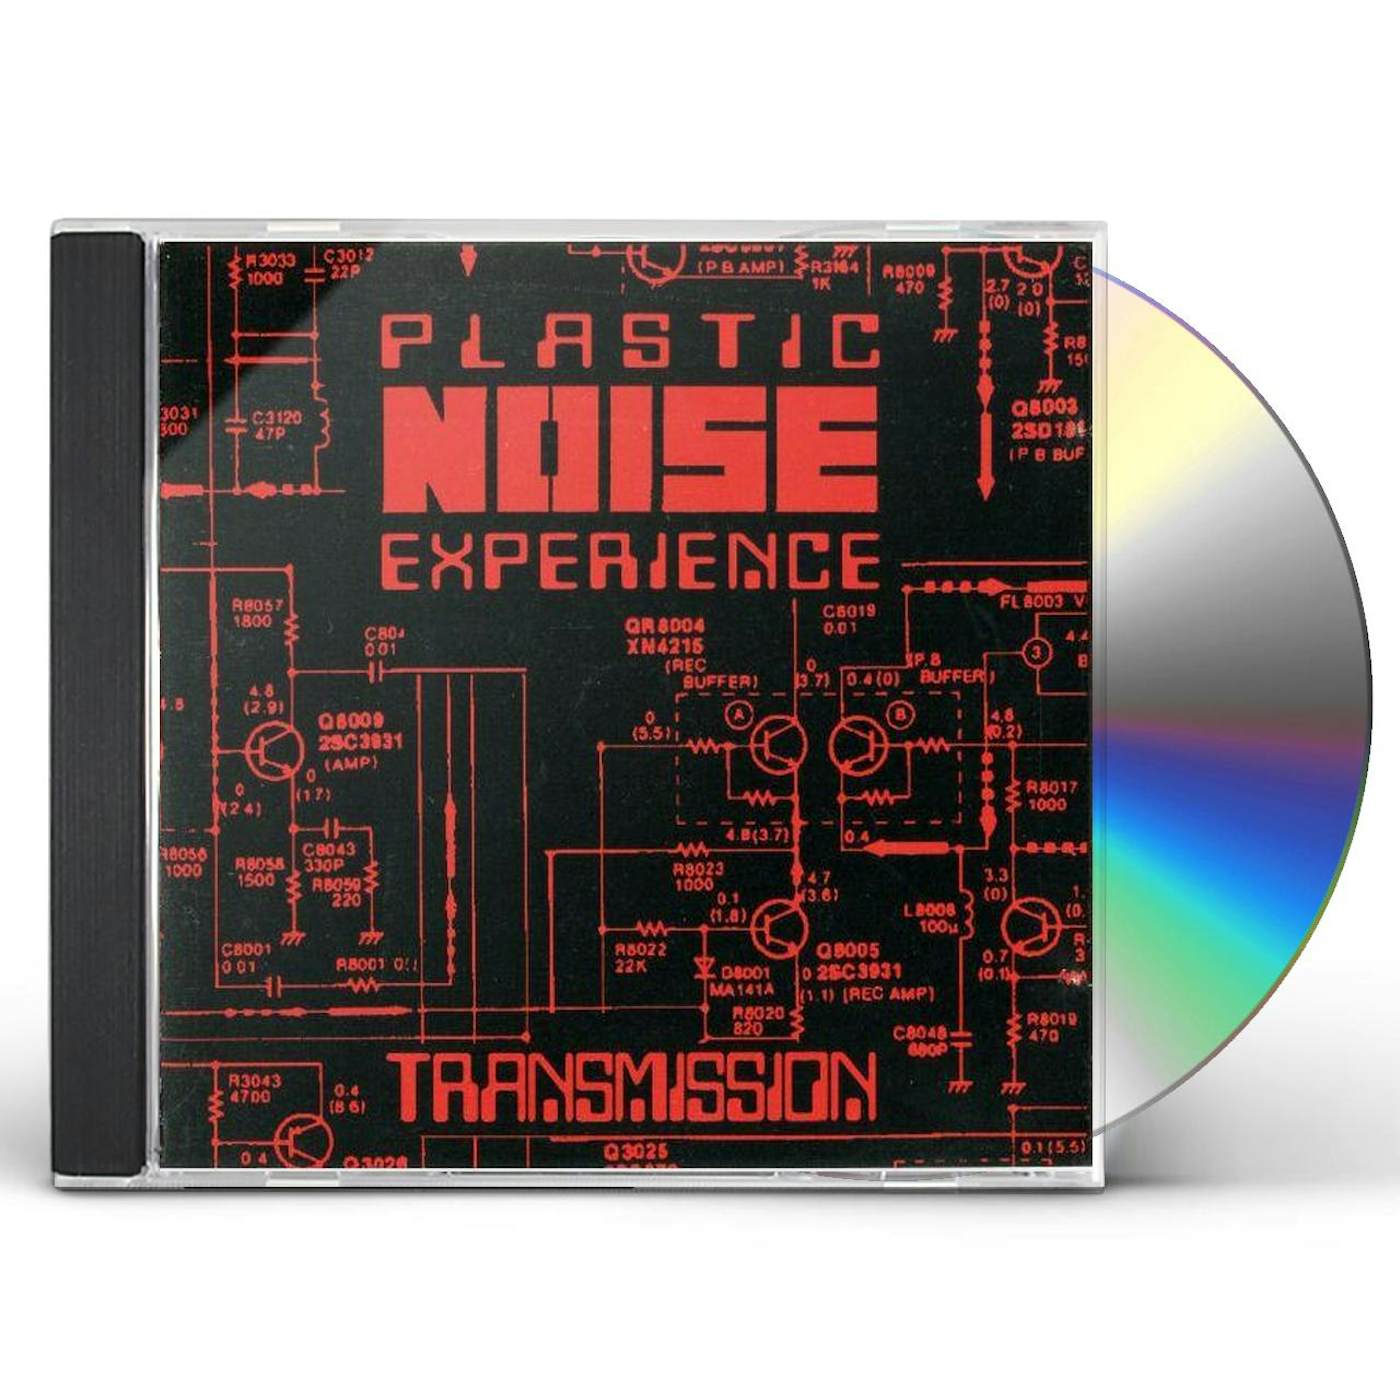 The Plastic Noise Experience NEURAL TRANSMISSION CD